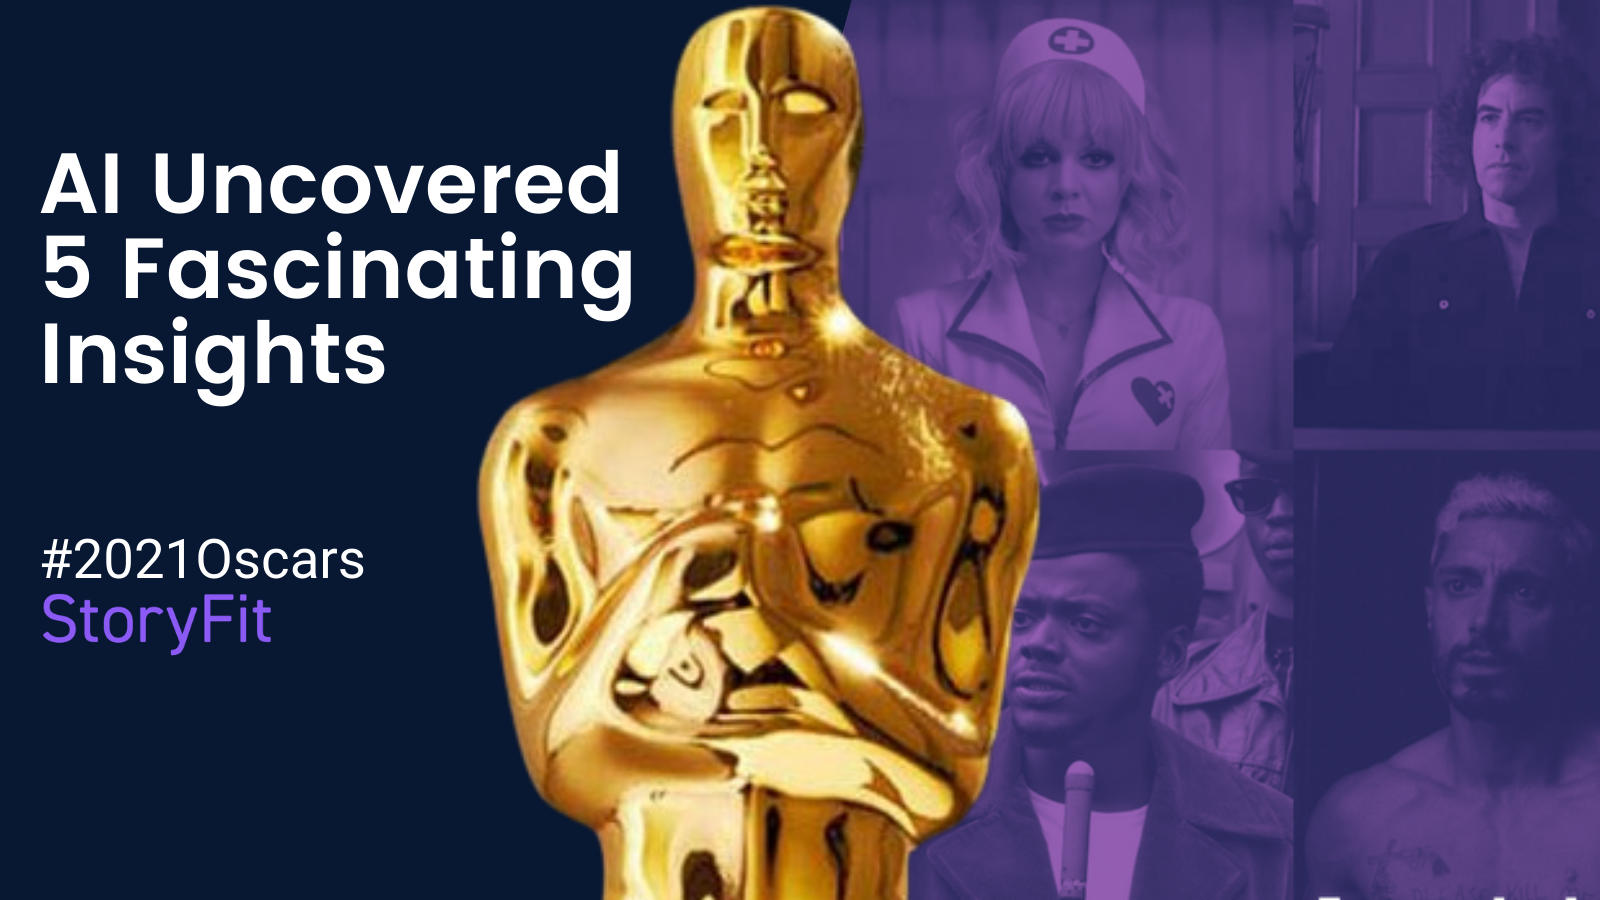 Graphic Reads "AI Uncovered 5 Fascinating Insights, #2021 Oscars" from StoryFit